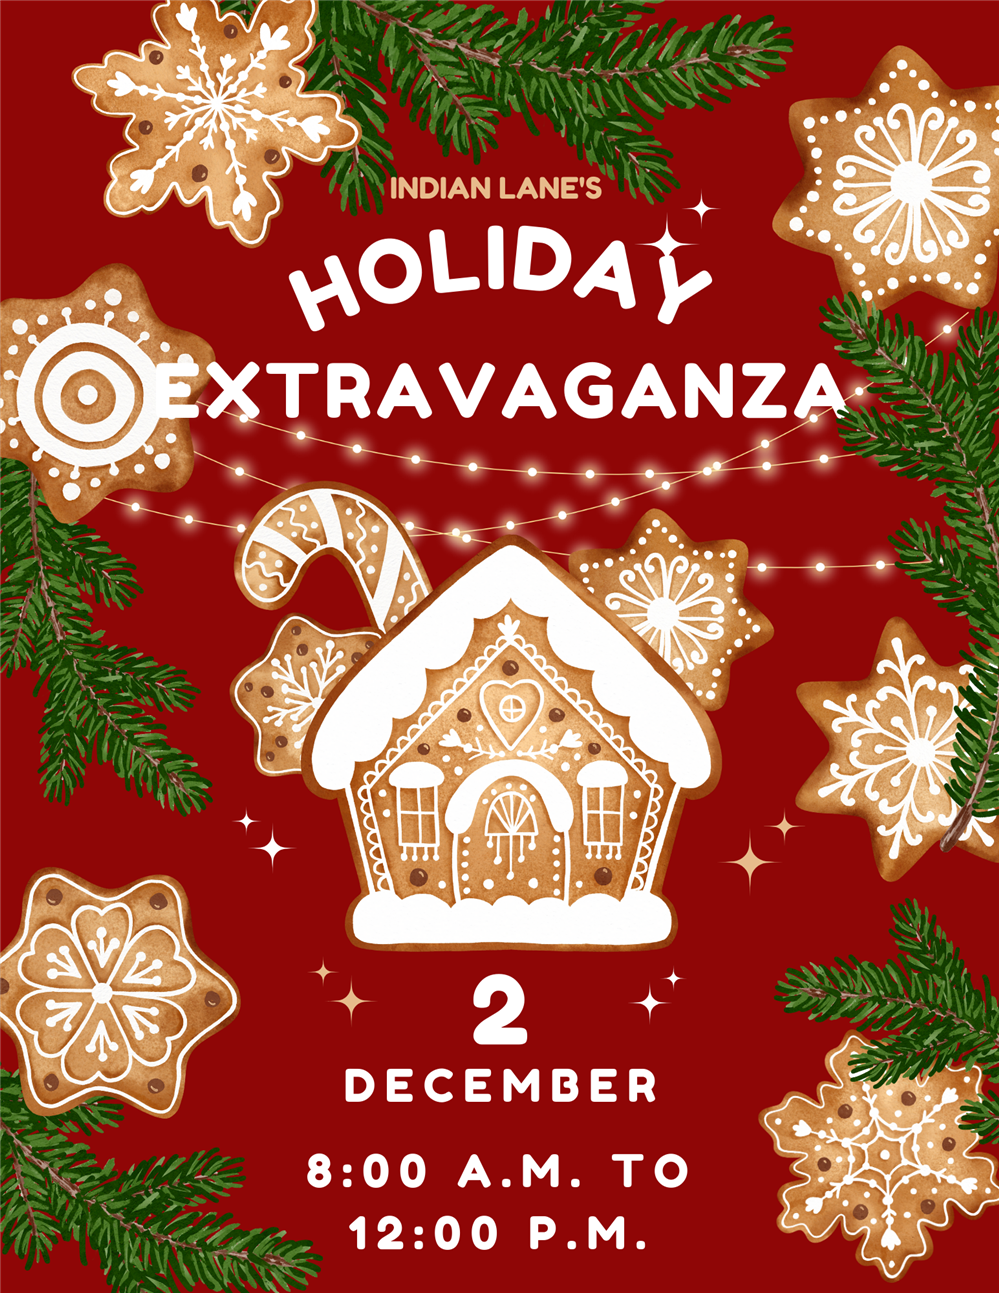  Holiday Extravaganza is Saturday December 2nd from 8 a.m. to Noon